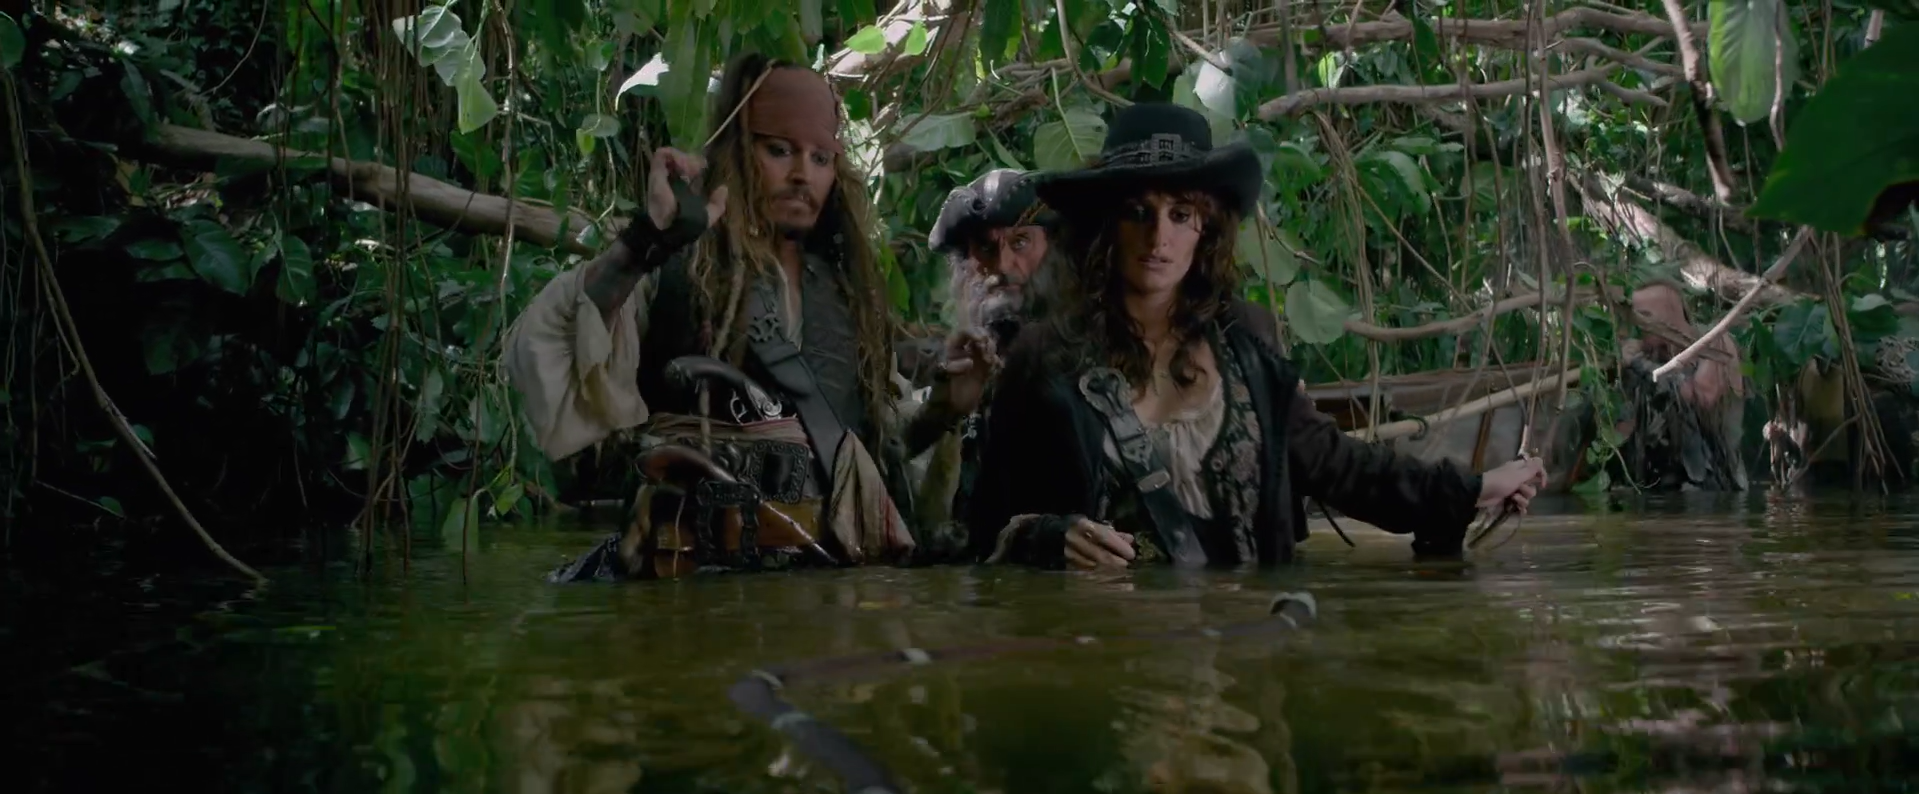 The end of the Johnny Depp era? Pirates of the Caribbean producer